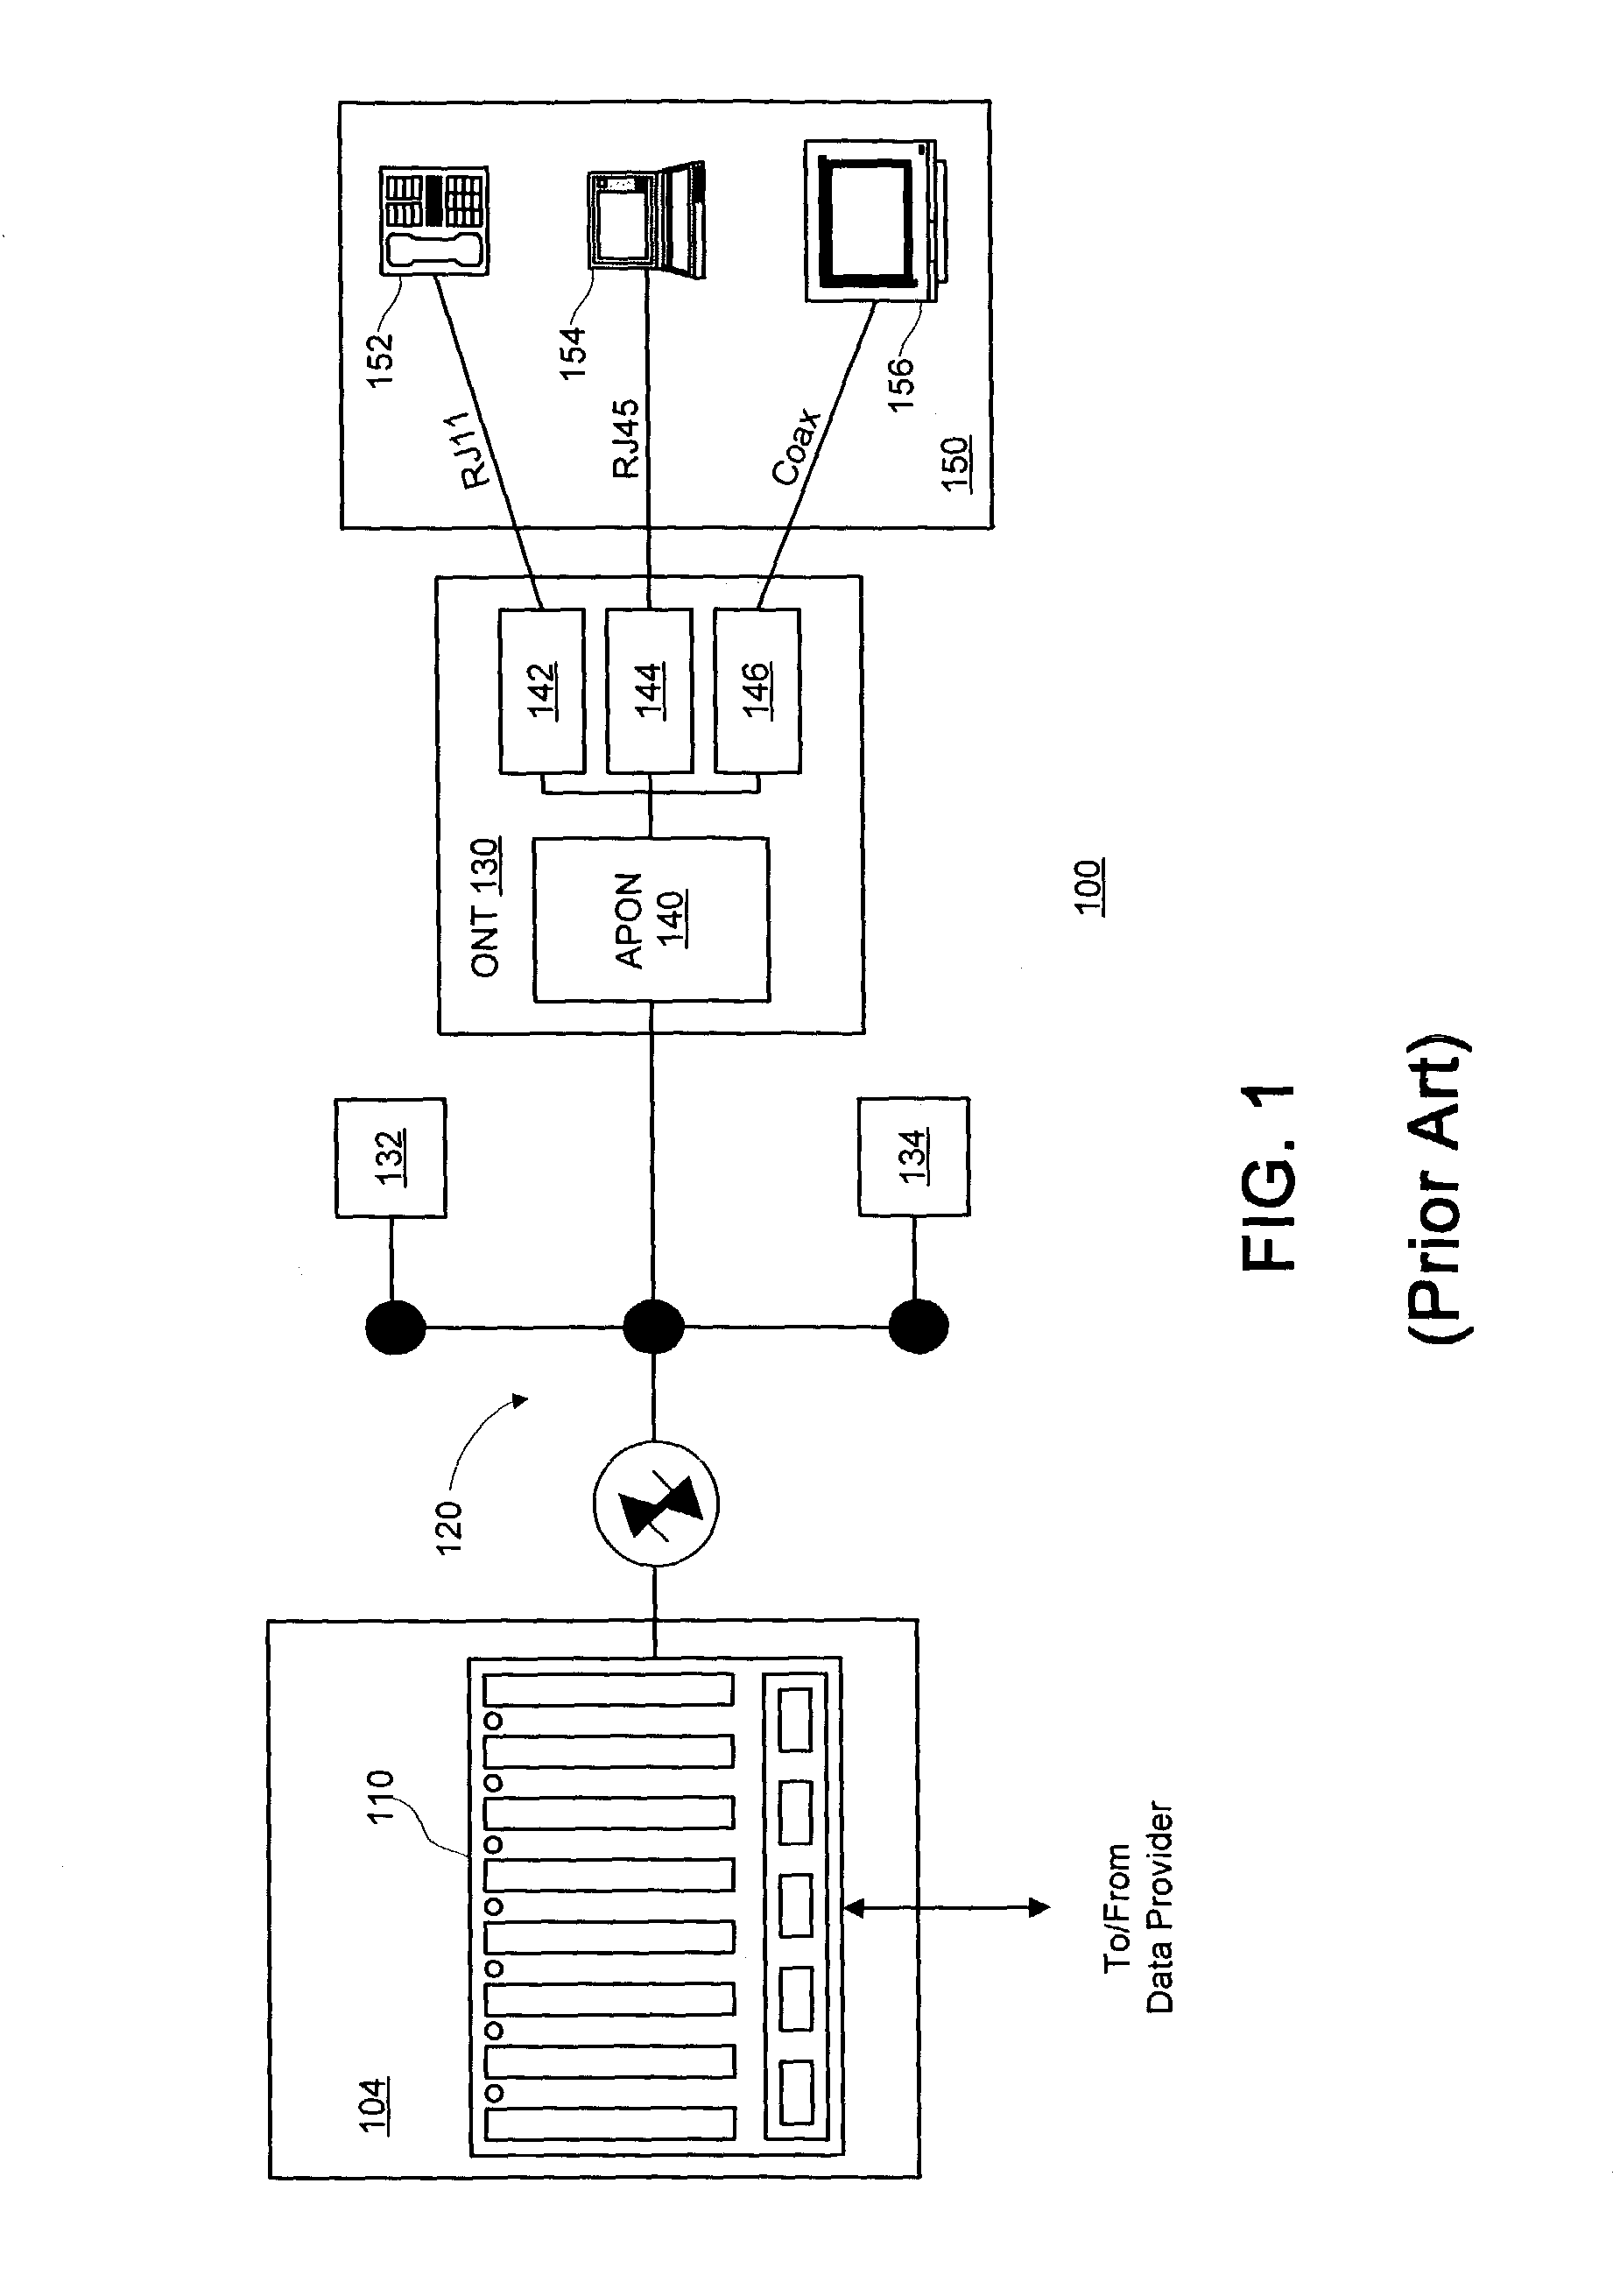 System and method for improved data protection in PONs